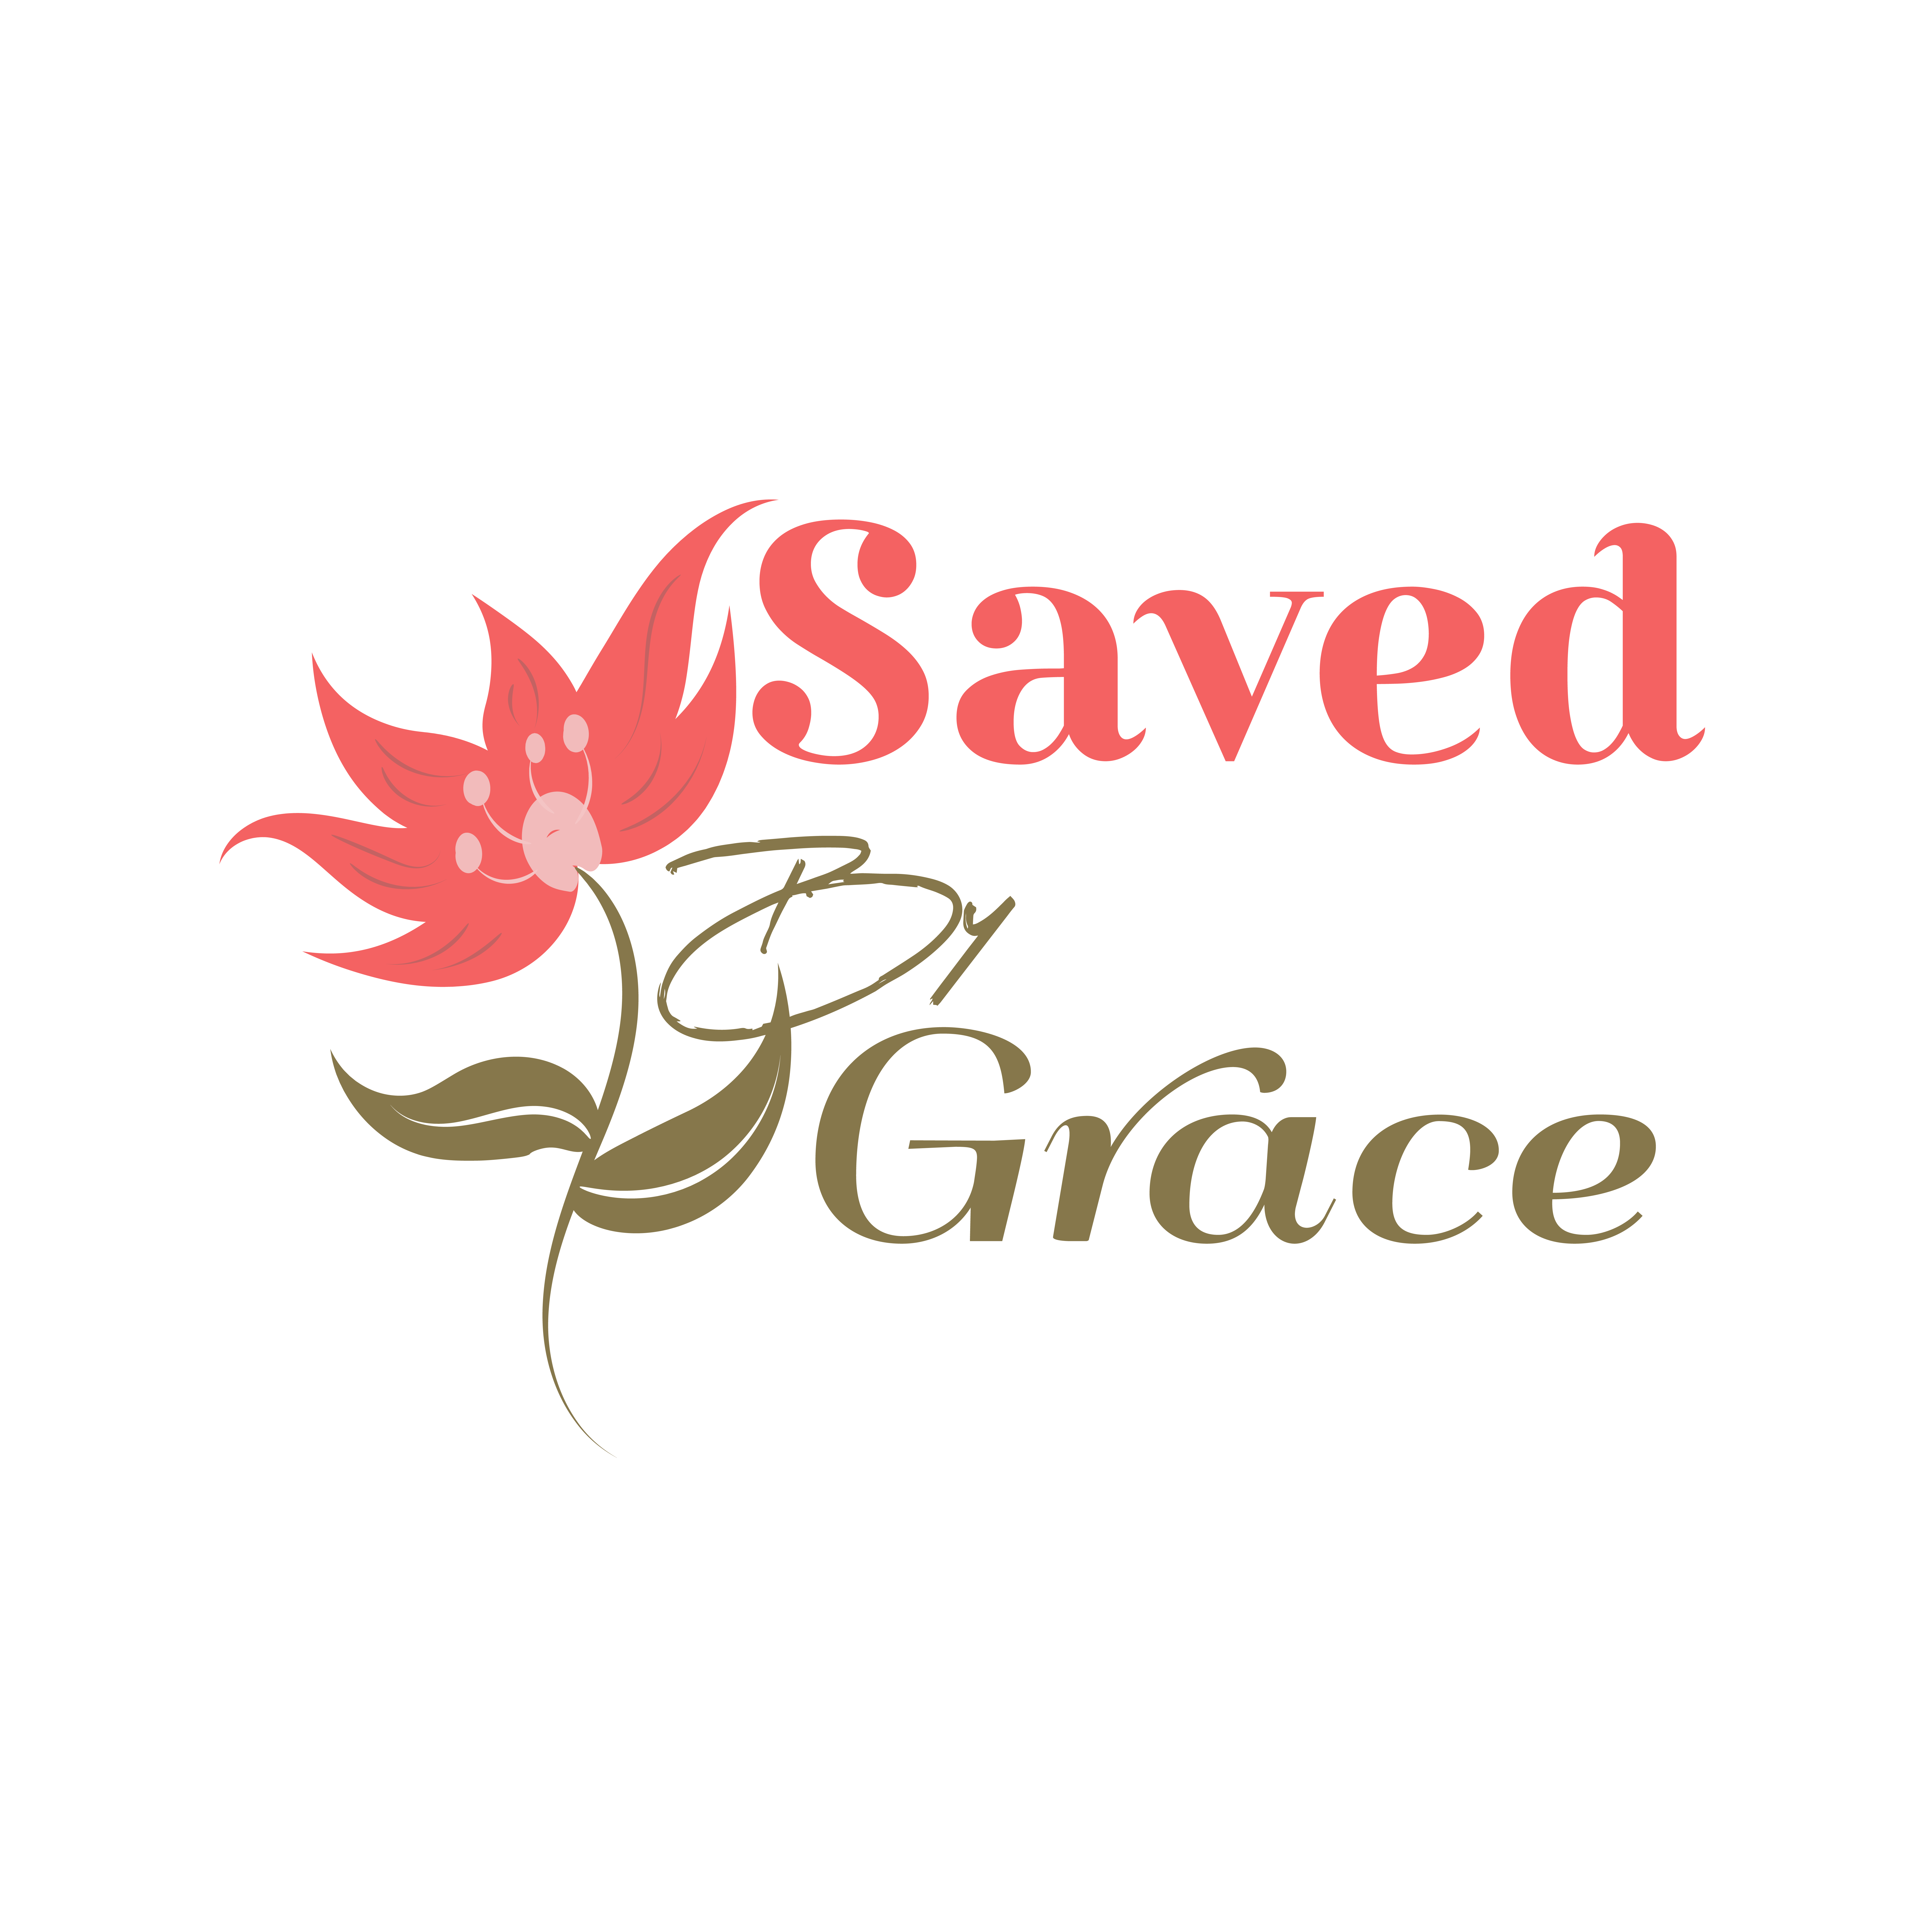 Logo for a wine company called saved grace.